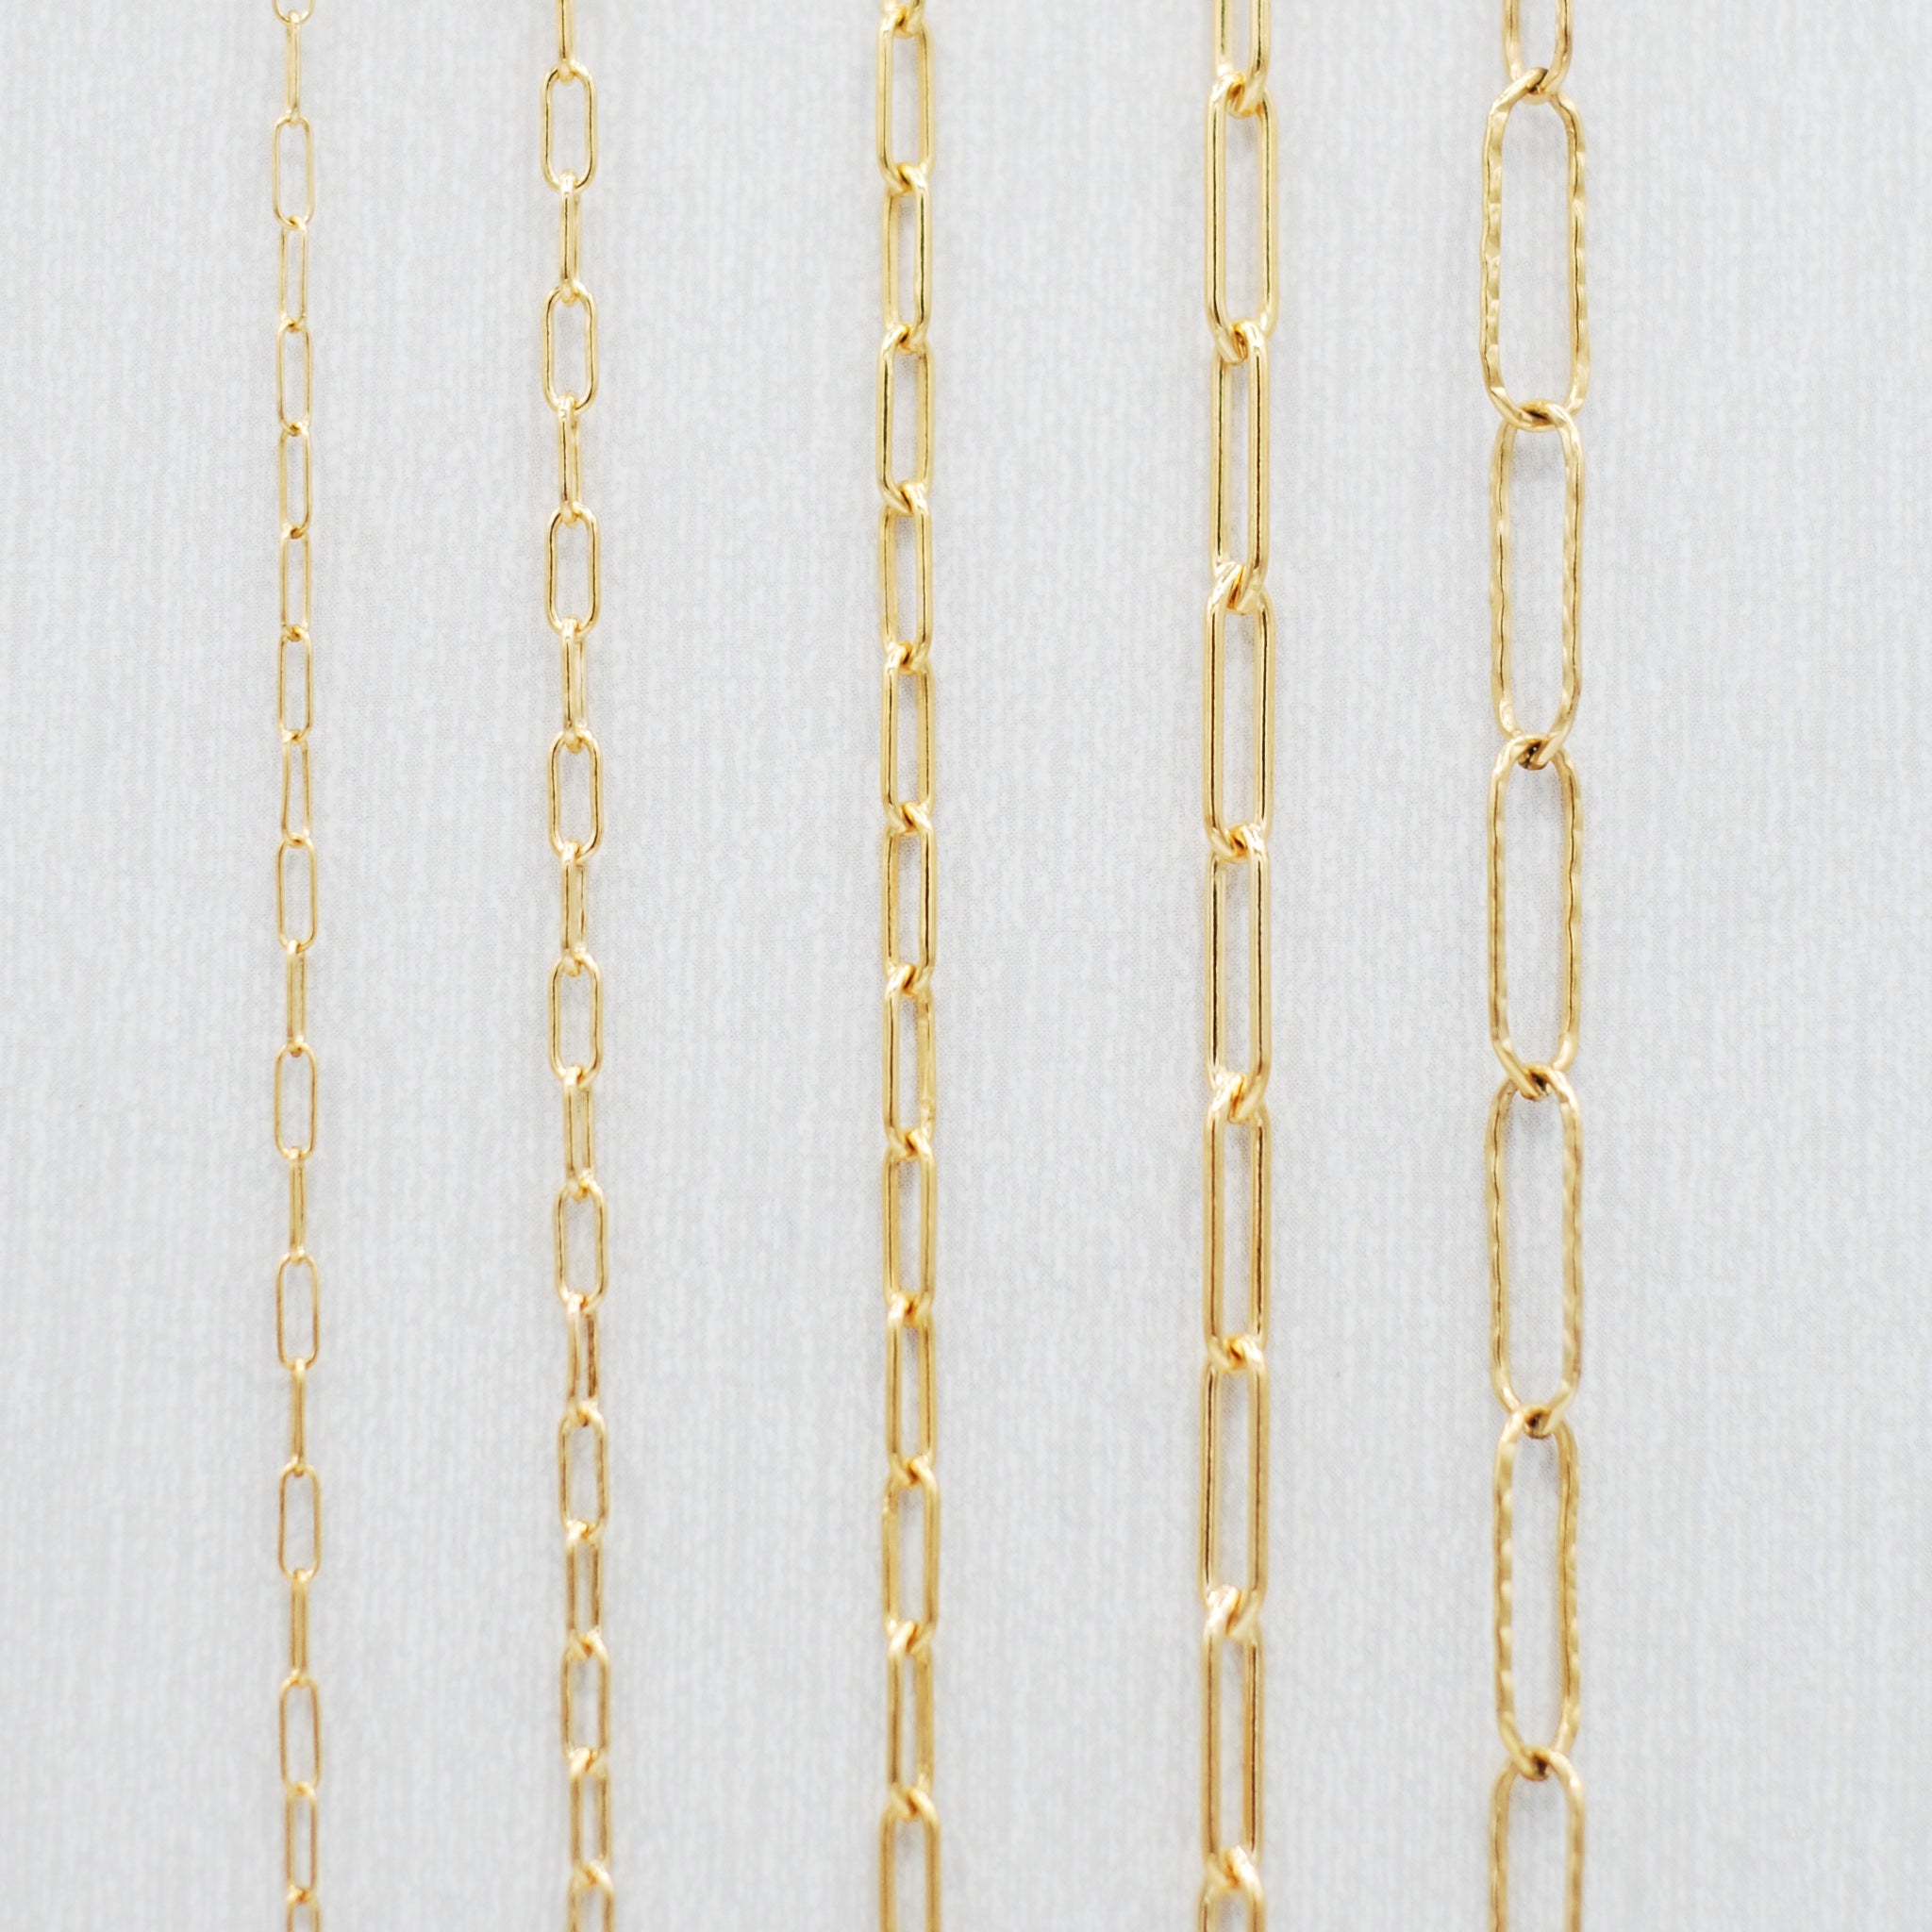 14k Gold Filled Large Paper Clip Layering Chain